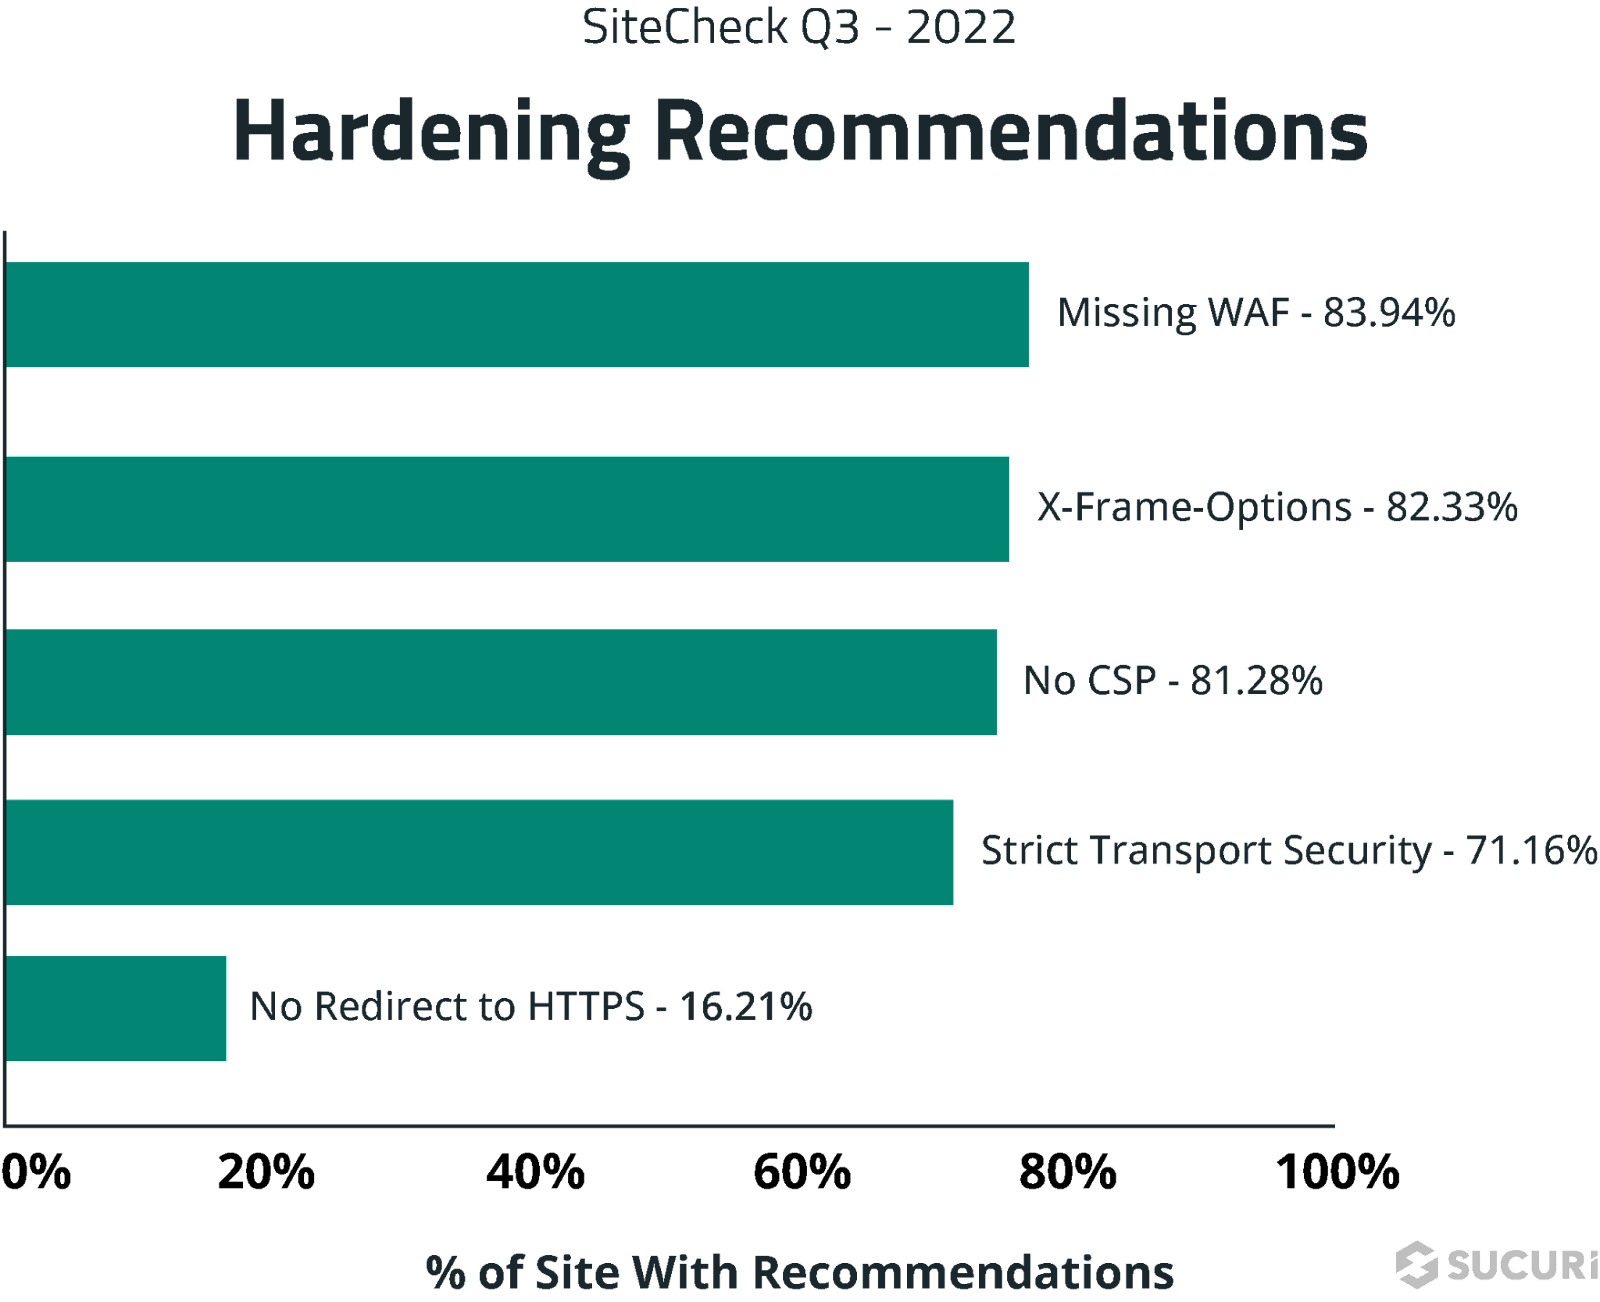 Hardening recommendations